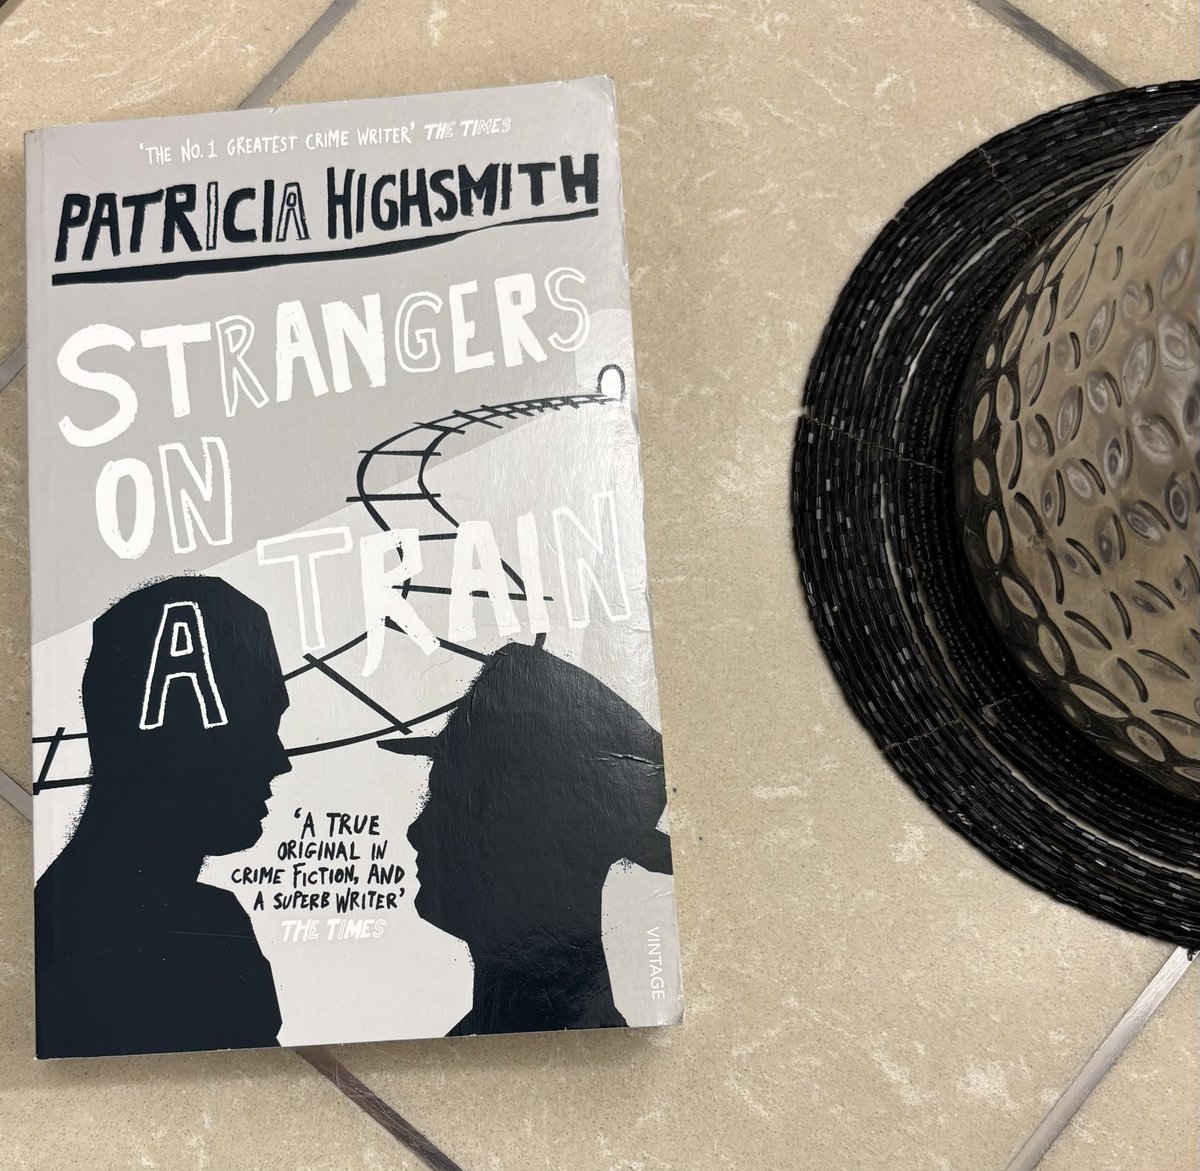 Train chats? Fun! Murder pacts? Hard pass. Learn from Guy's mistakes in Strangers on a Train by Patricia Highsmith. #psychologicalthriller #bookreviews #booktwt #books 
whispersfromthebookshelf.com/2024/05/01/str…